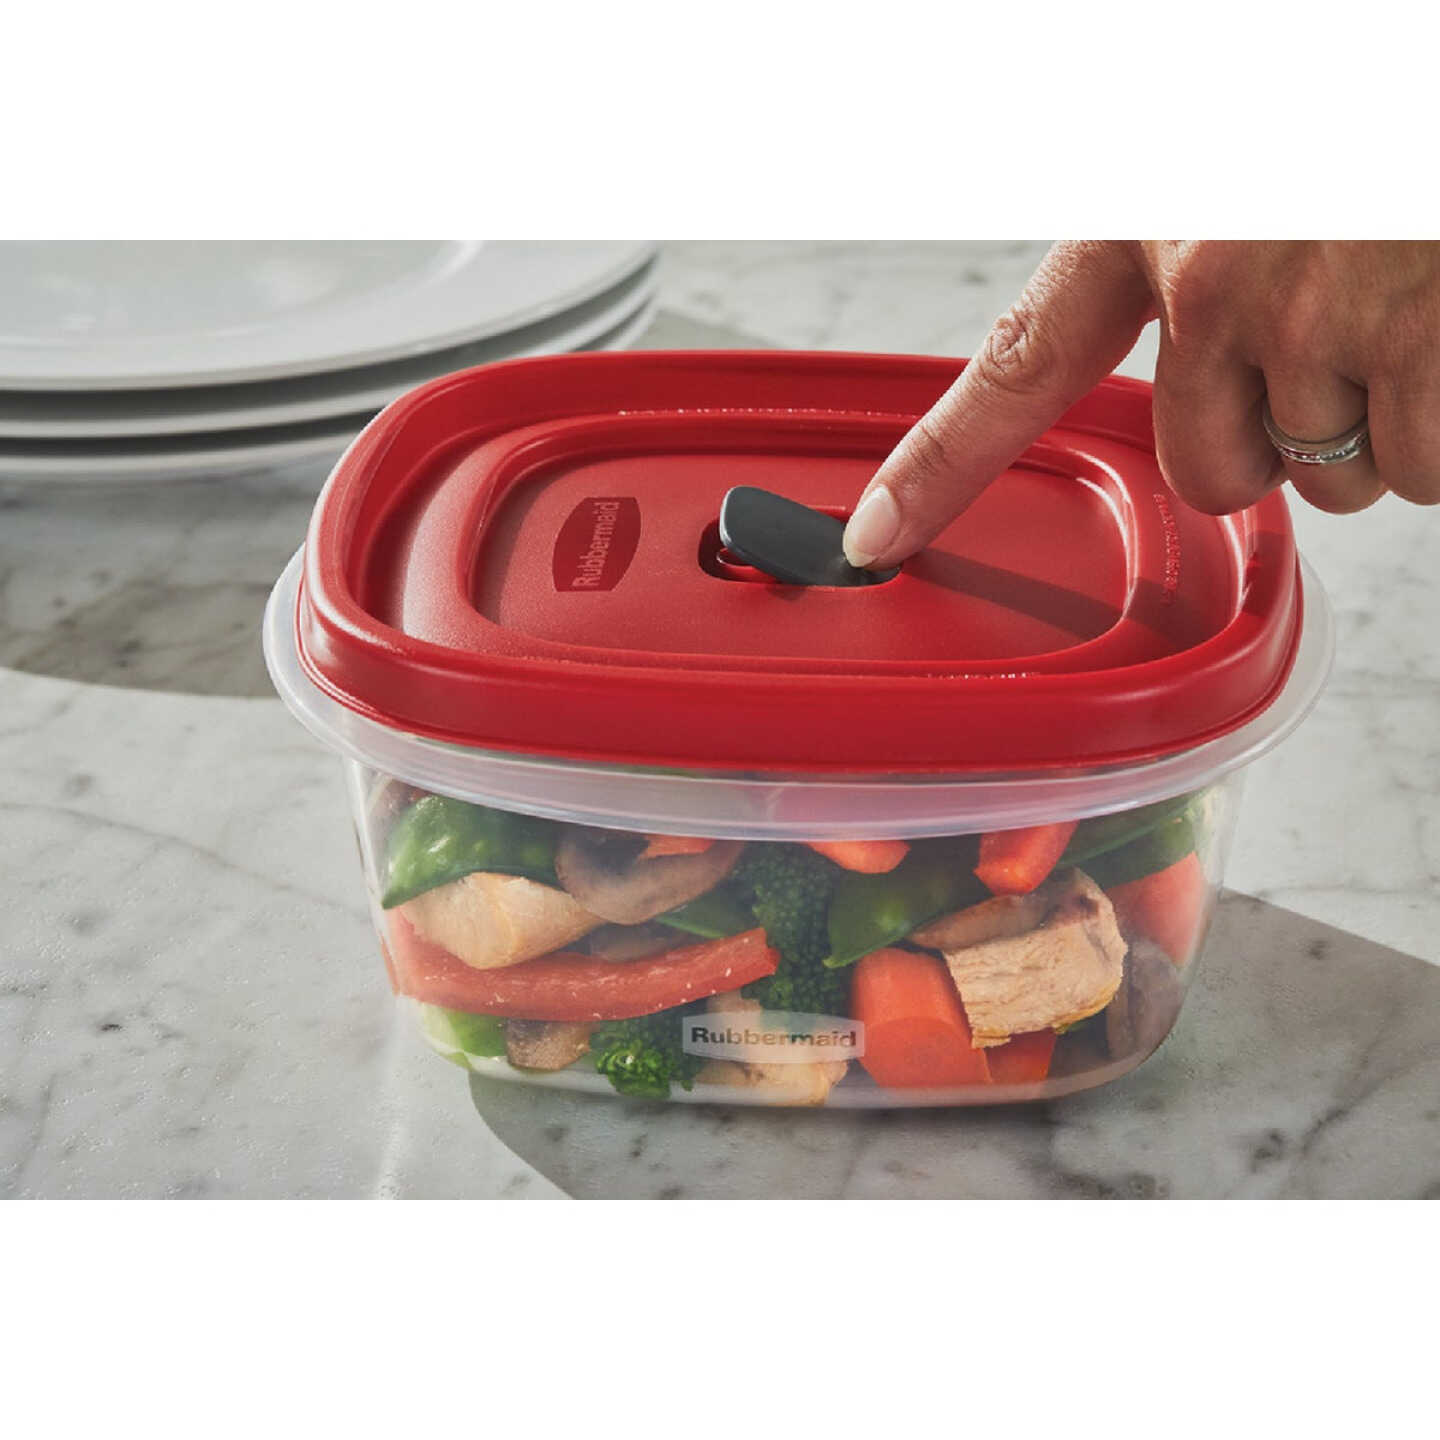 Ziploc Containers & Lids, Rectangle, 1.5 Quart 2 Ea, Food Storage  Containers